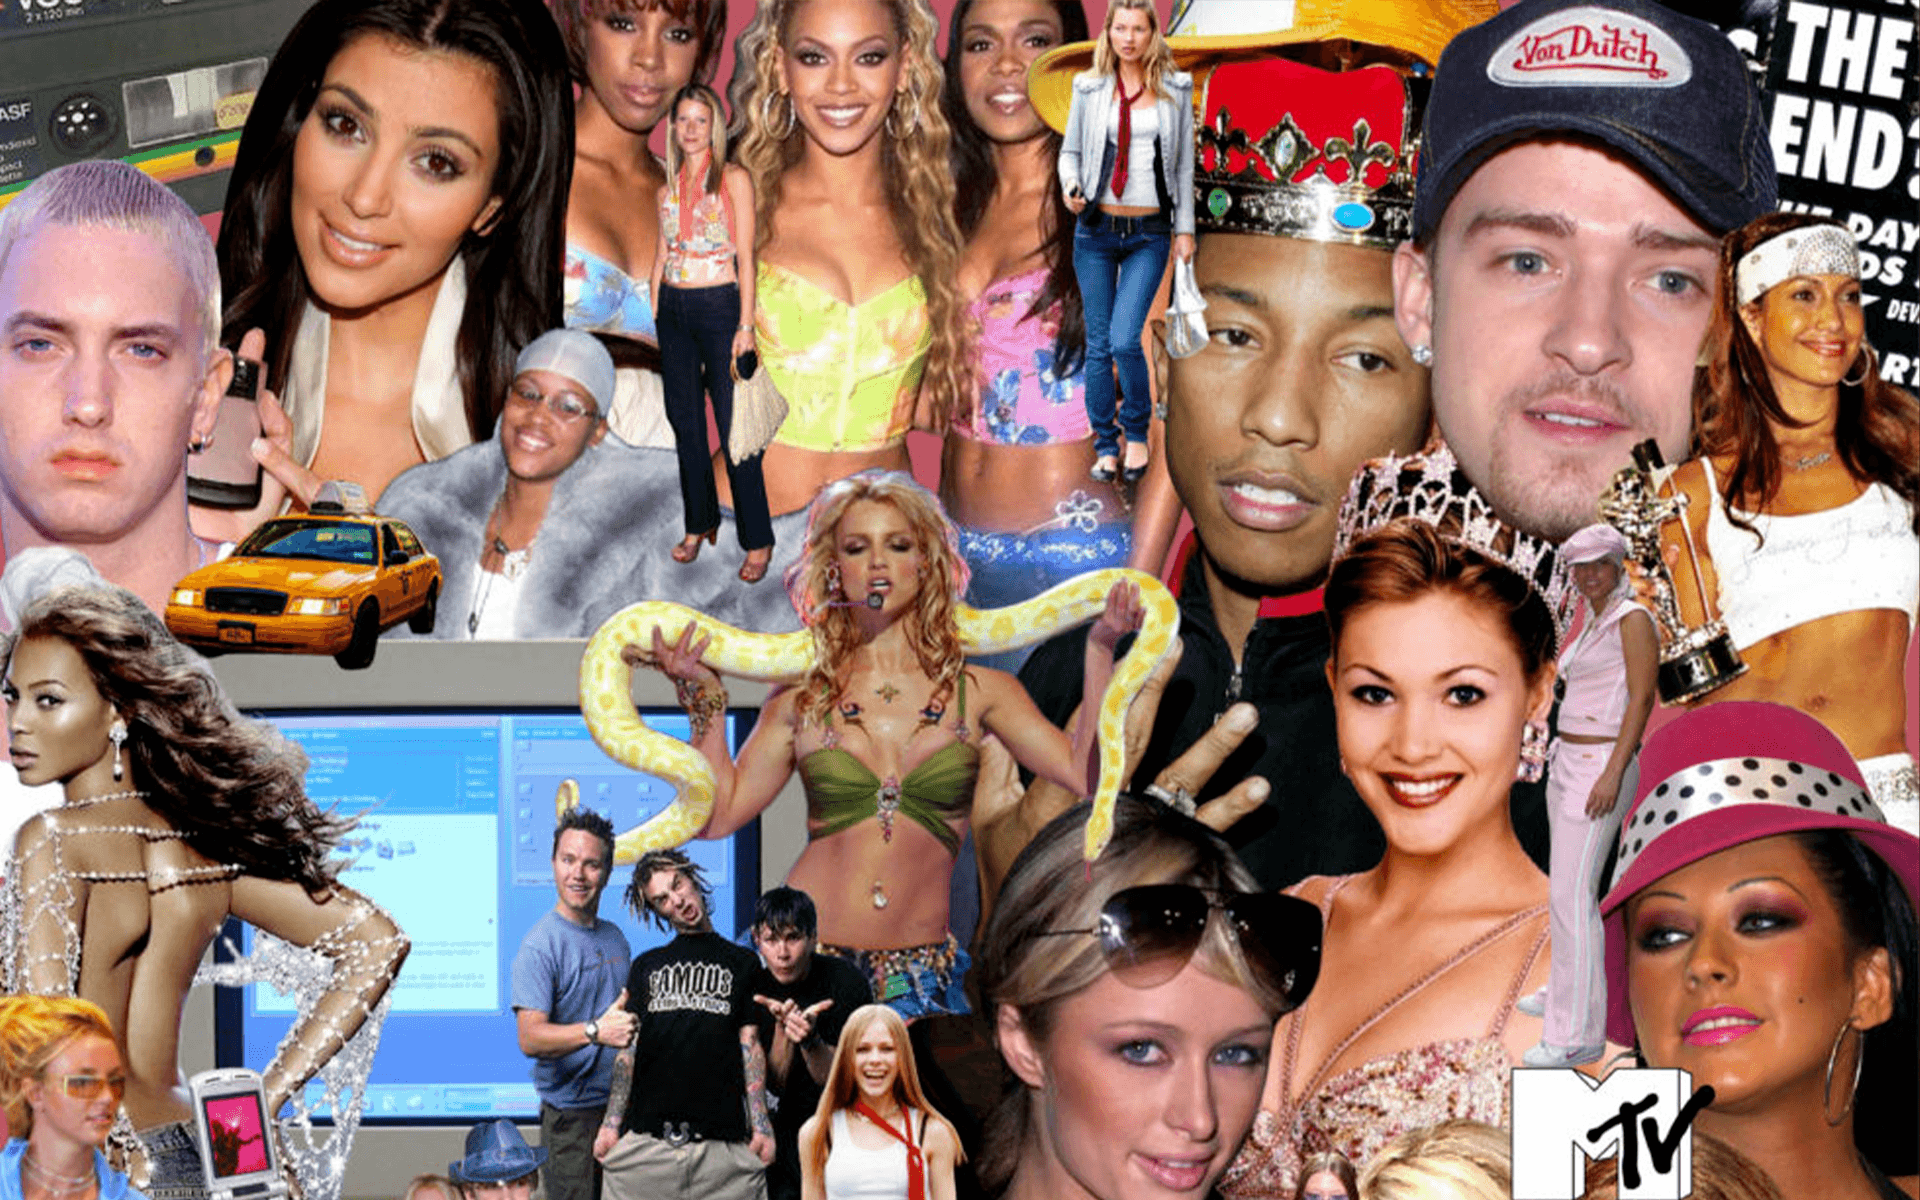 What Is Y2K Fashion — And How to Emulate It - Revivalist